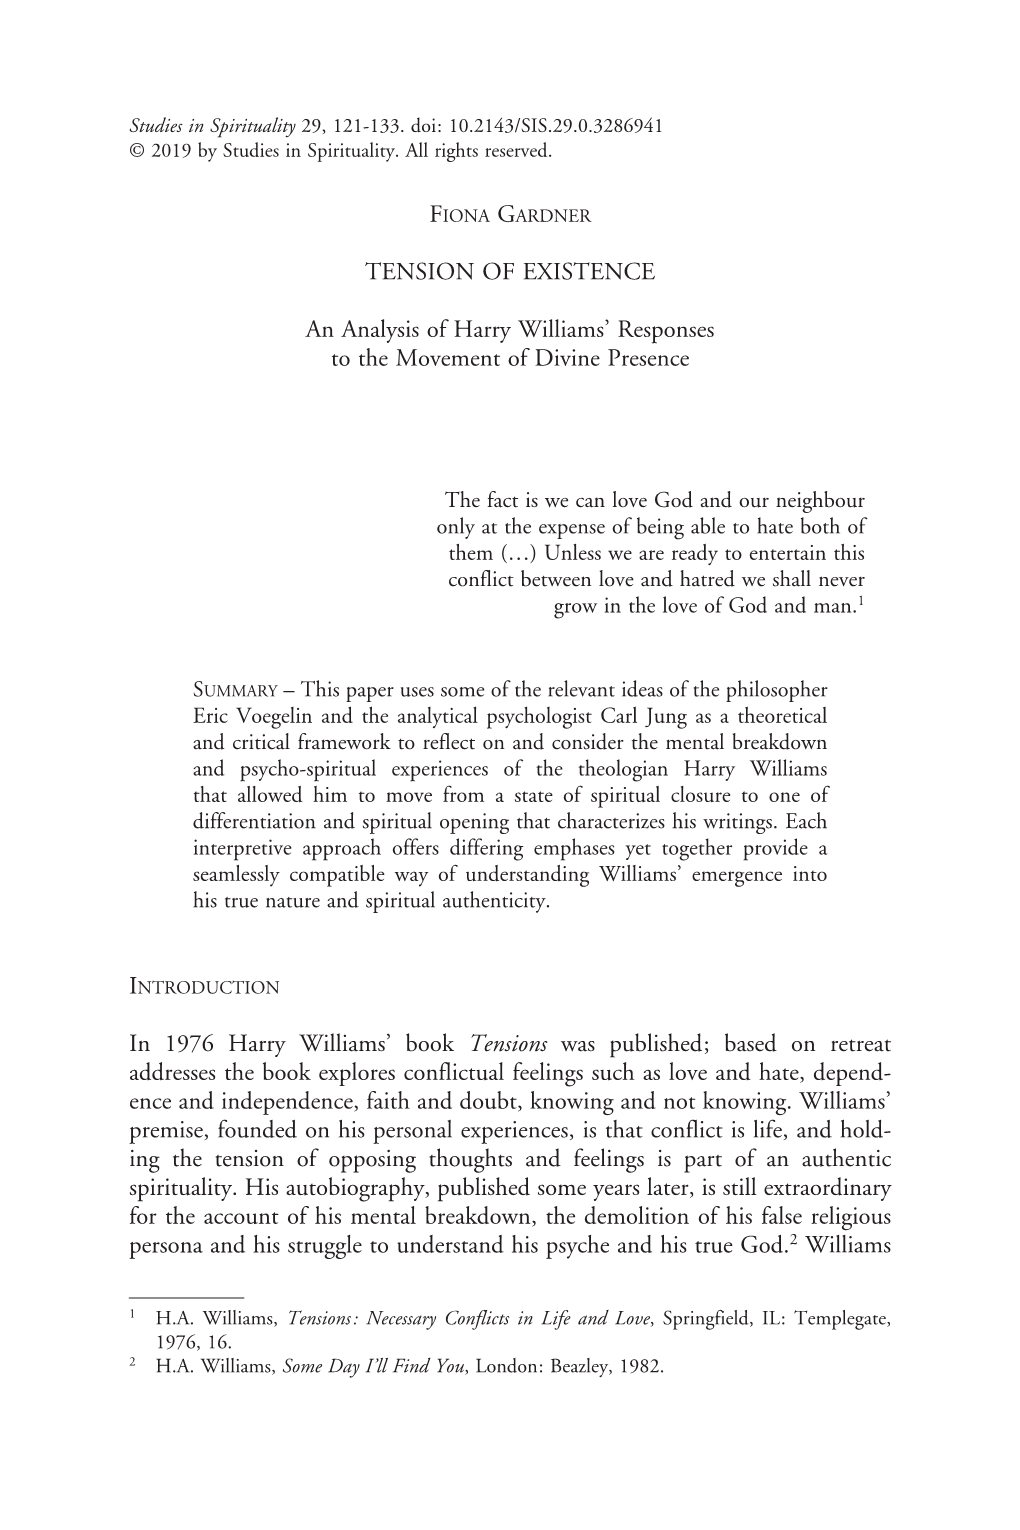 TENSION of EXISTENCE an Analysis of Harry Williams